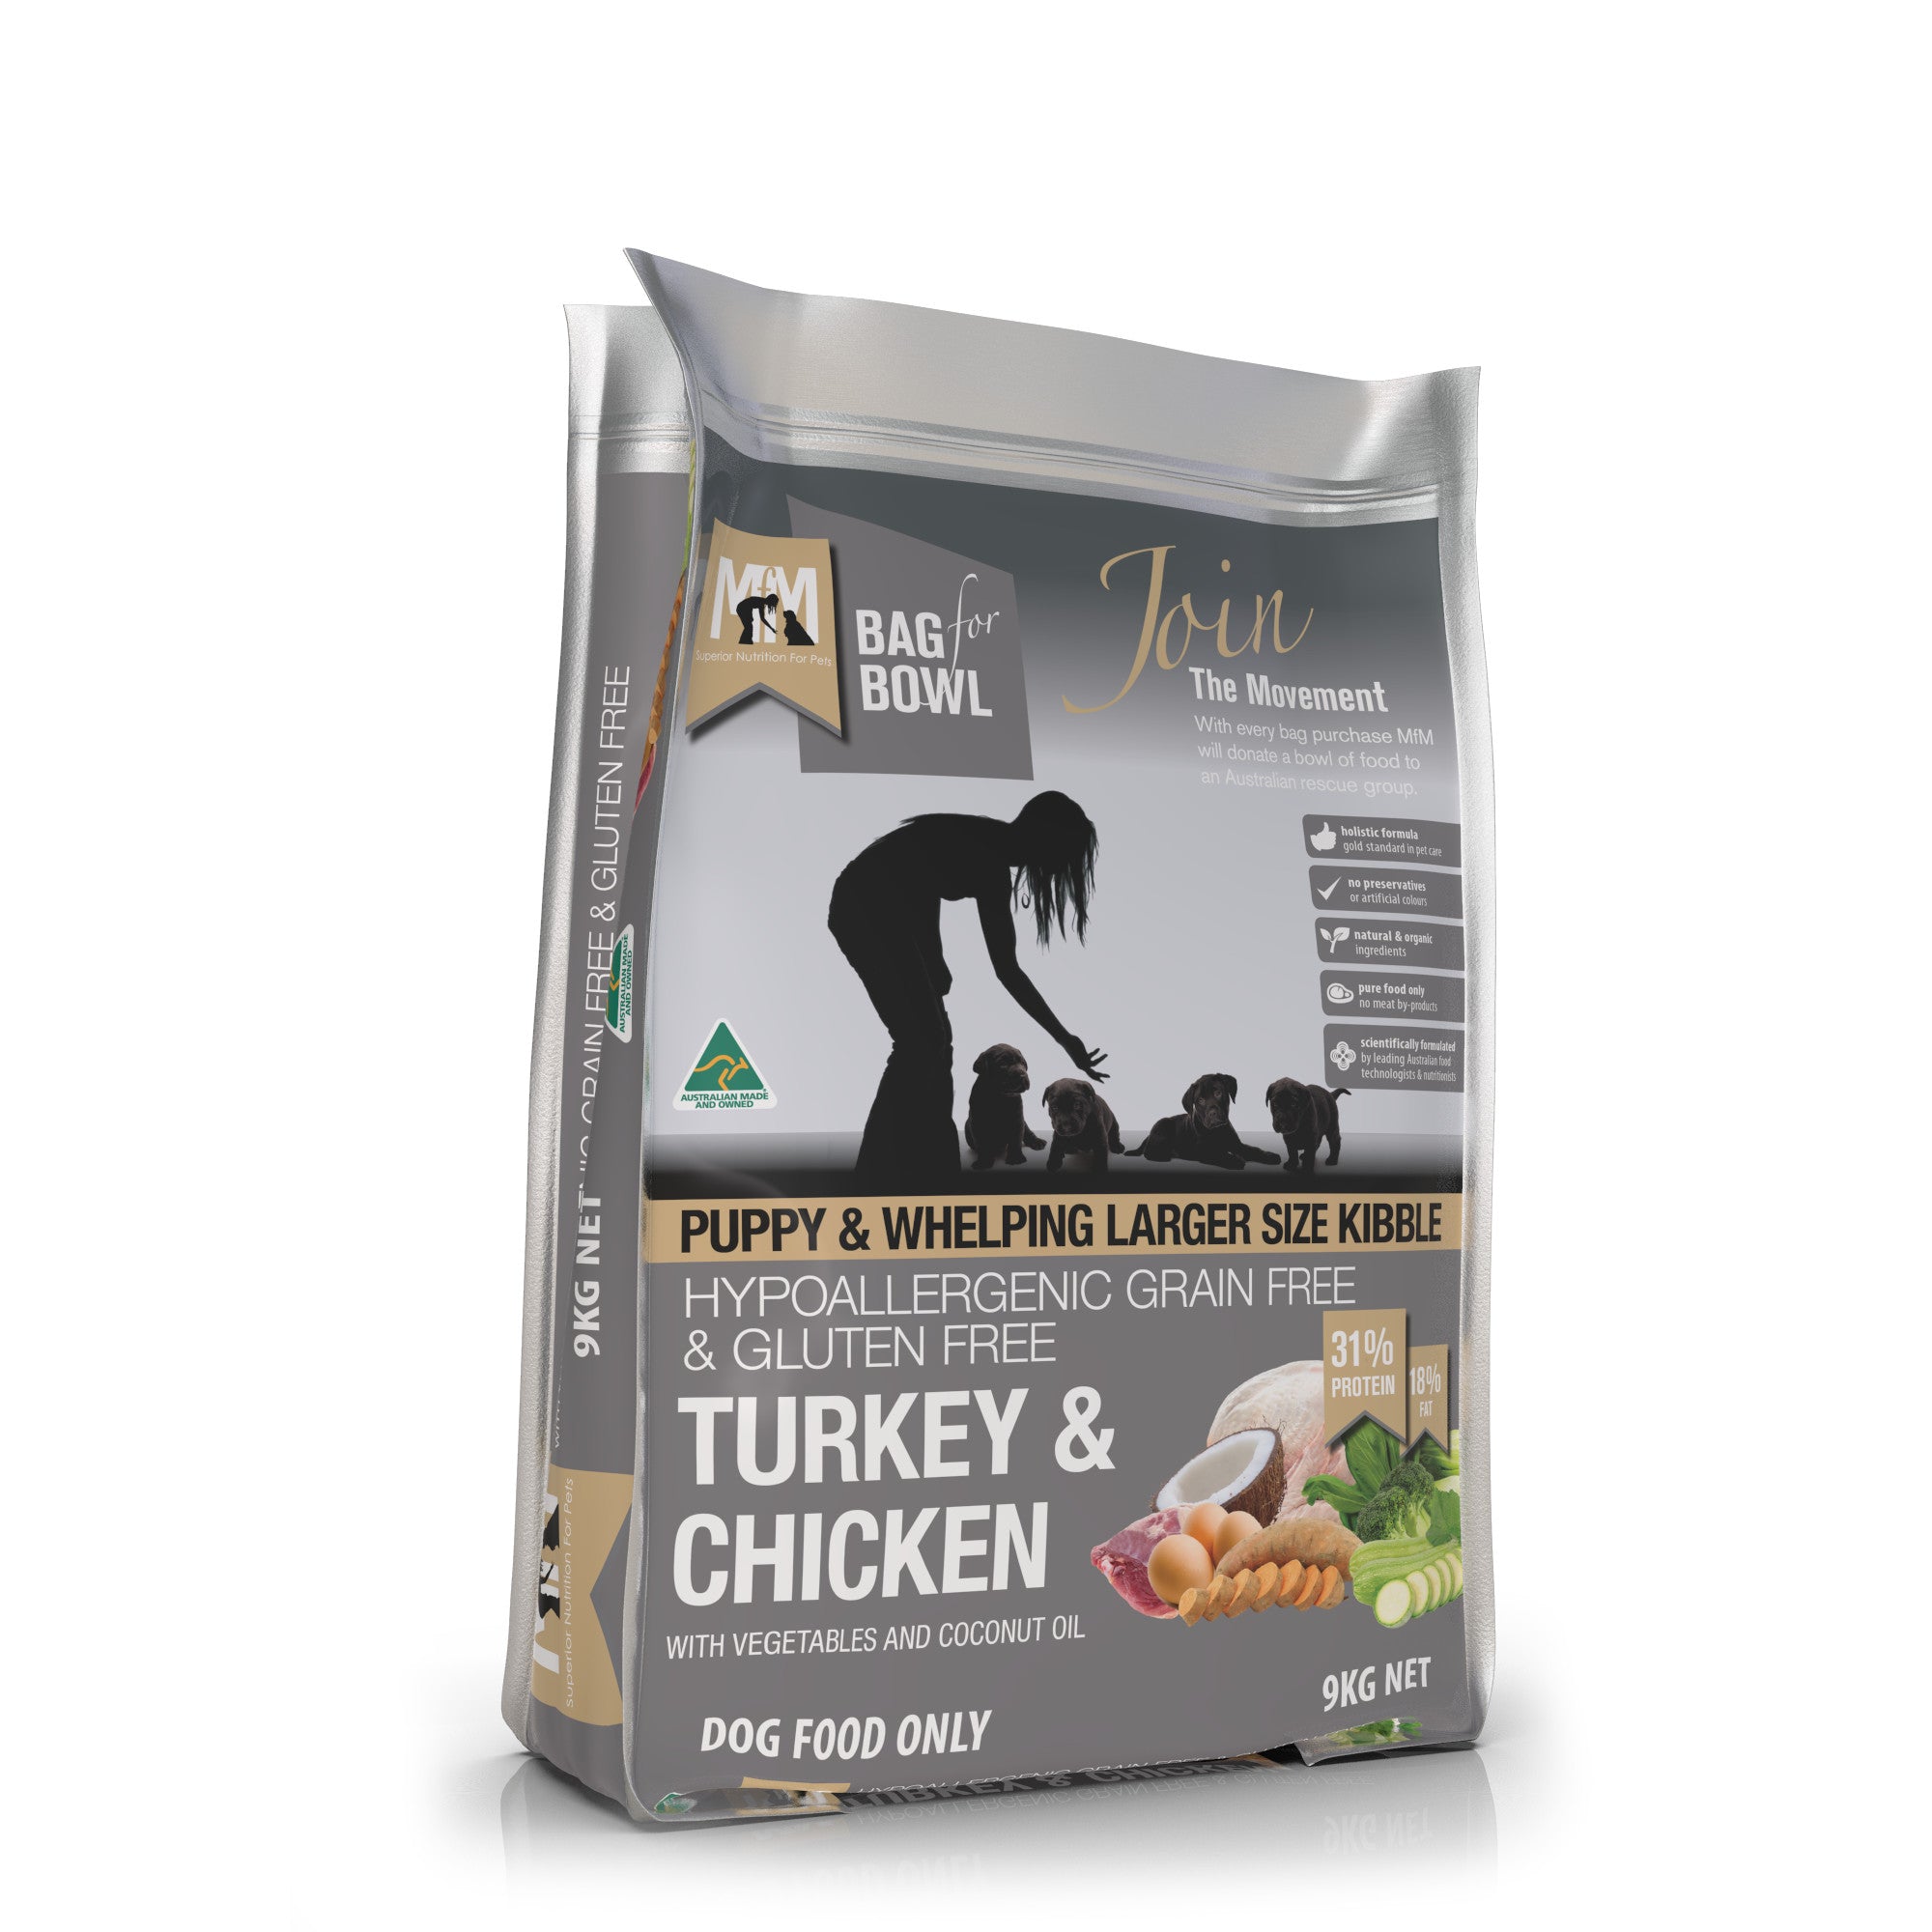 MEALS FOR MUTTS Turkey & Chicken Large Kibble Dry Puppy Food 9kg.